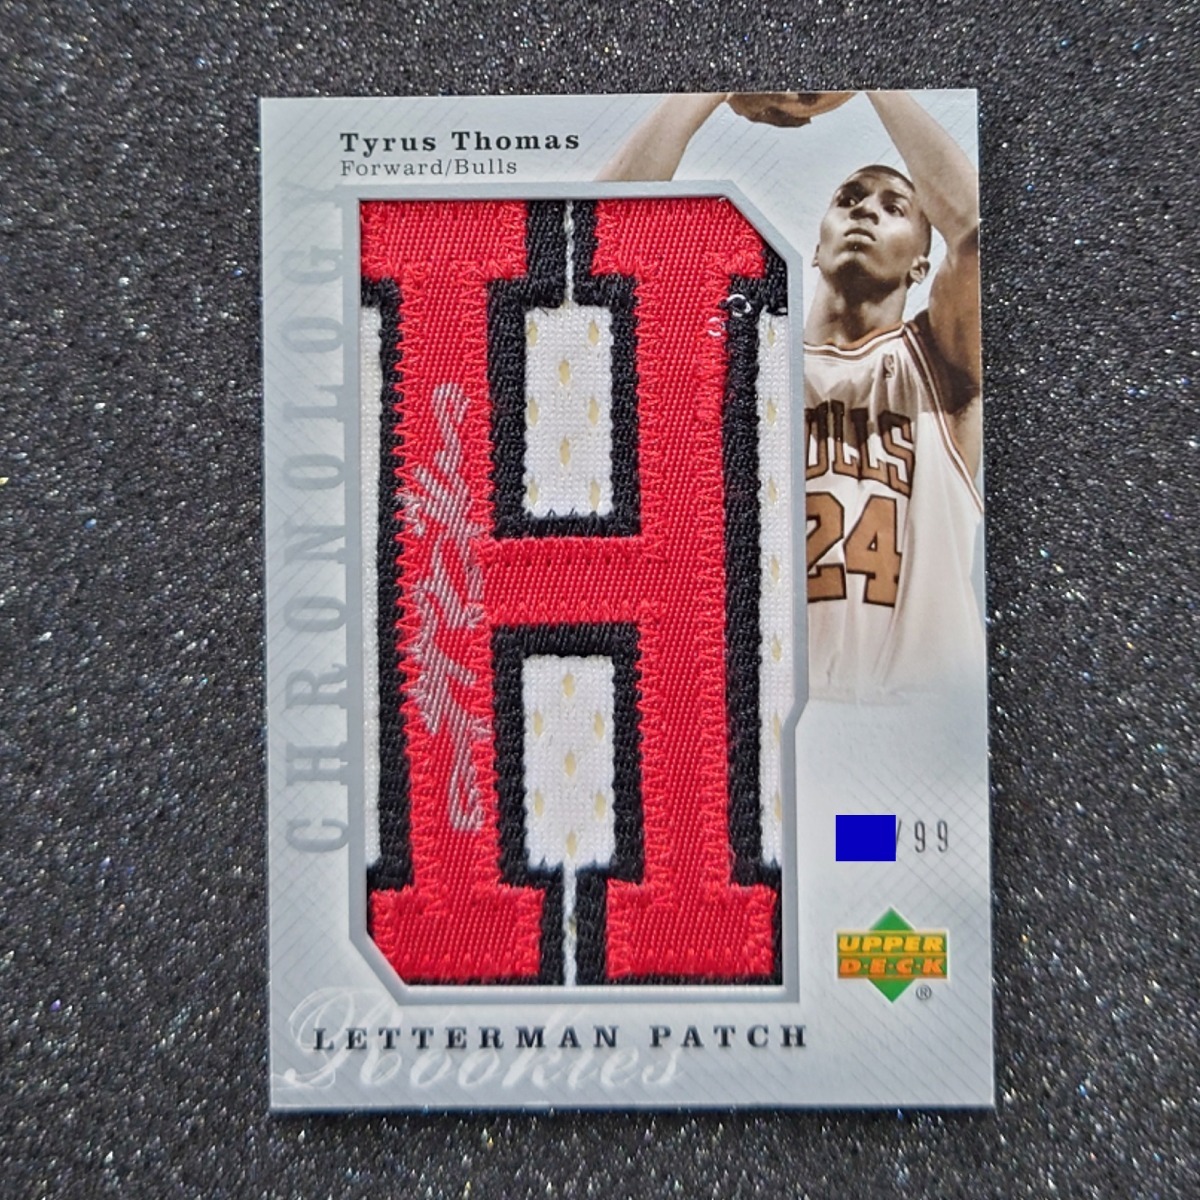 ◆【Auto card】Tyrus Thomas 2006-07 NBA UD Chronology Rookie Letterman Patch card #141　◇検索：タイラス・トーマス 直筆サイン_画像1